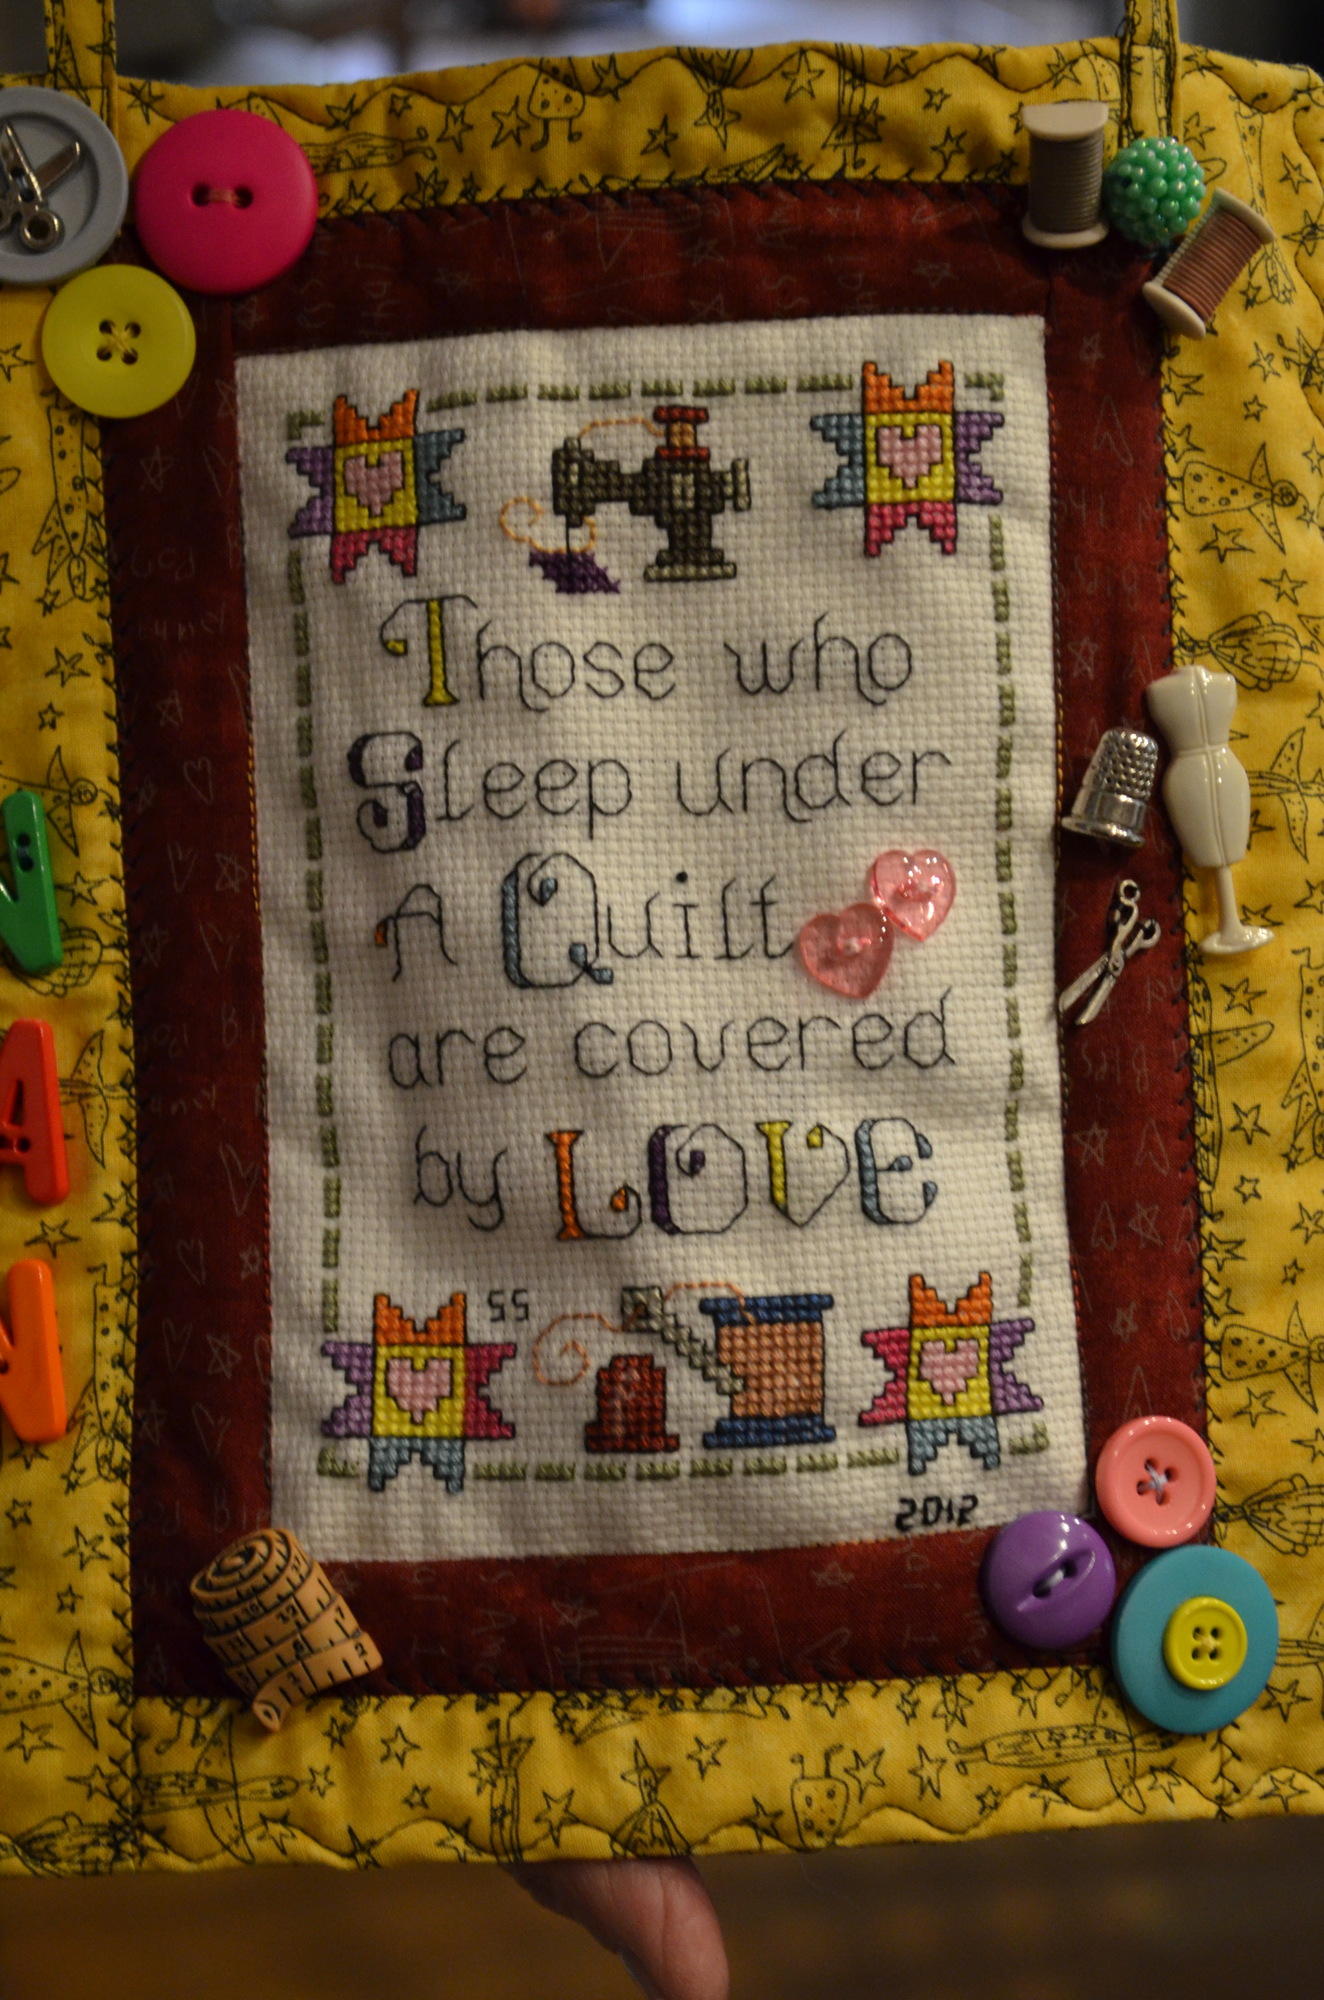 Sharon Stephens includes this phrase on the memory quilts she makes.